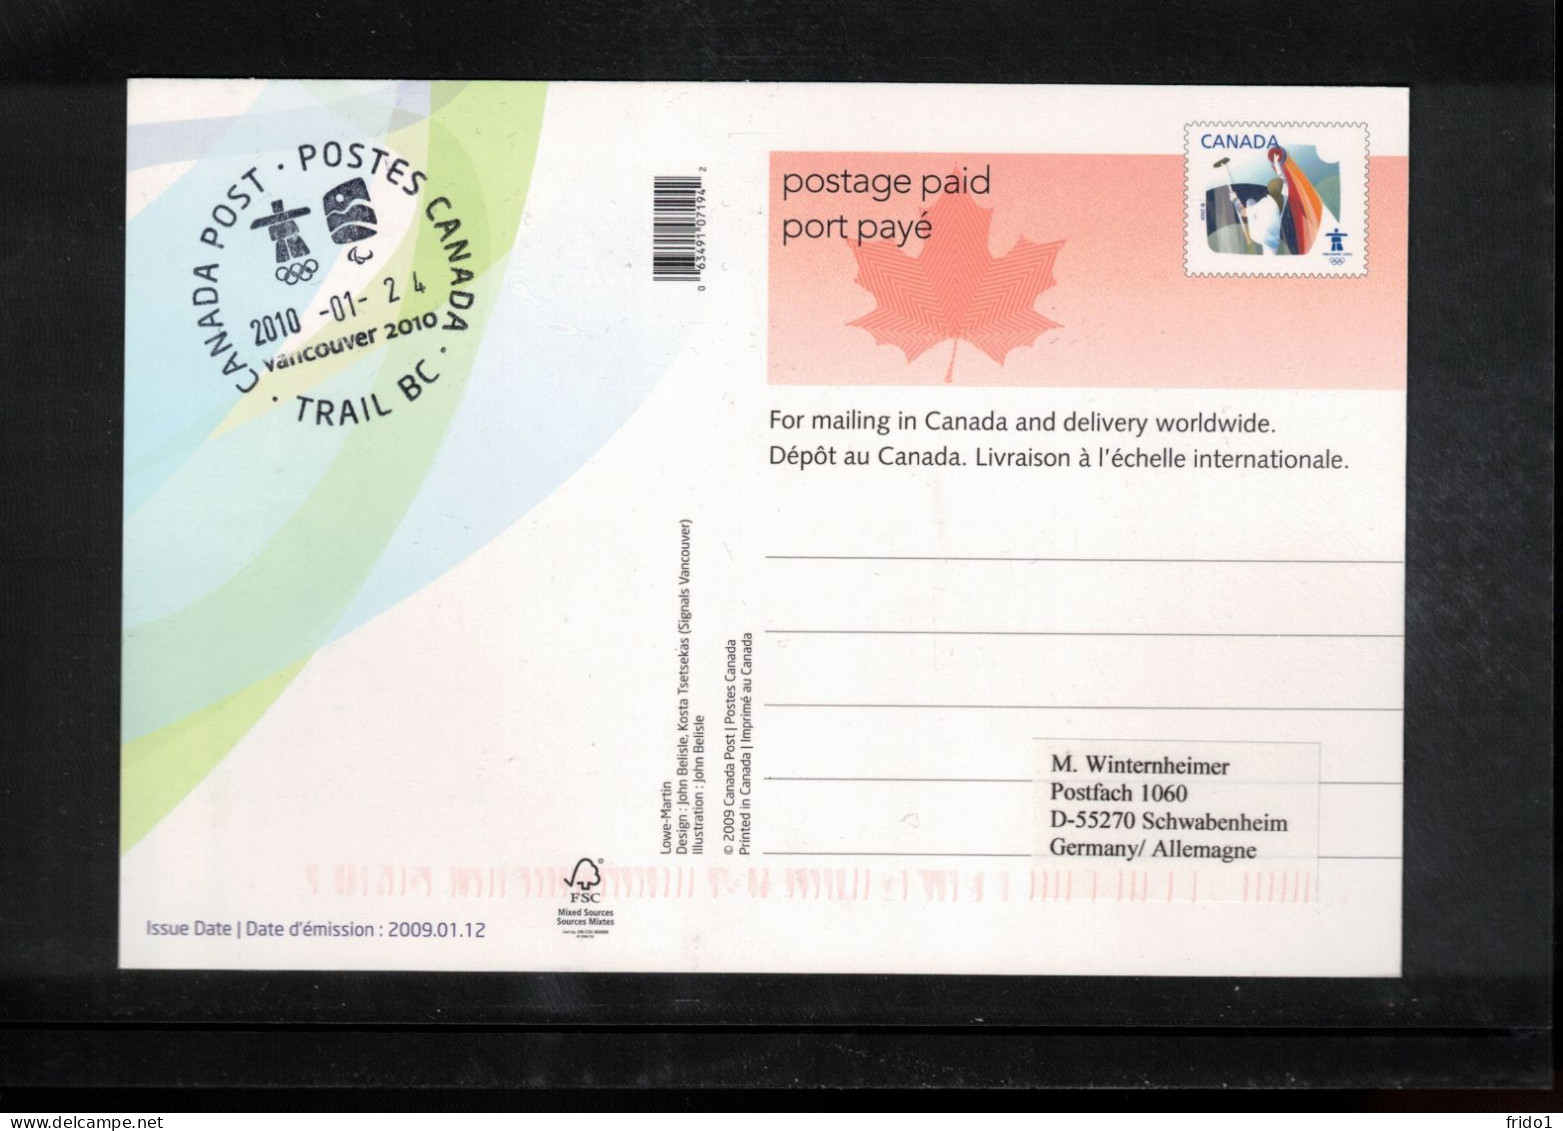 Canada 2010 Olympic Games Vancouver - TRAIL BC Postmark Interesting Postcard - Winter 2010: Vancouver